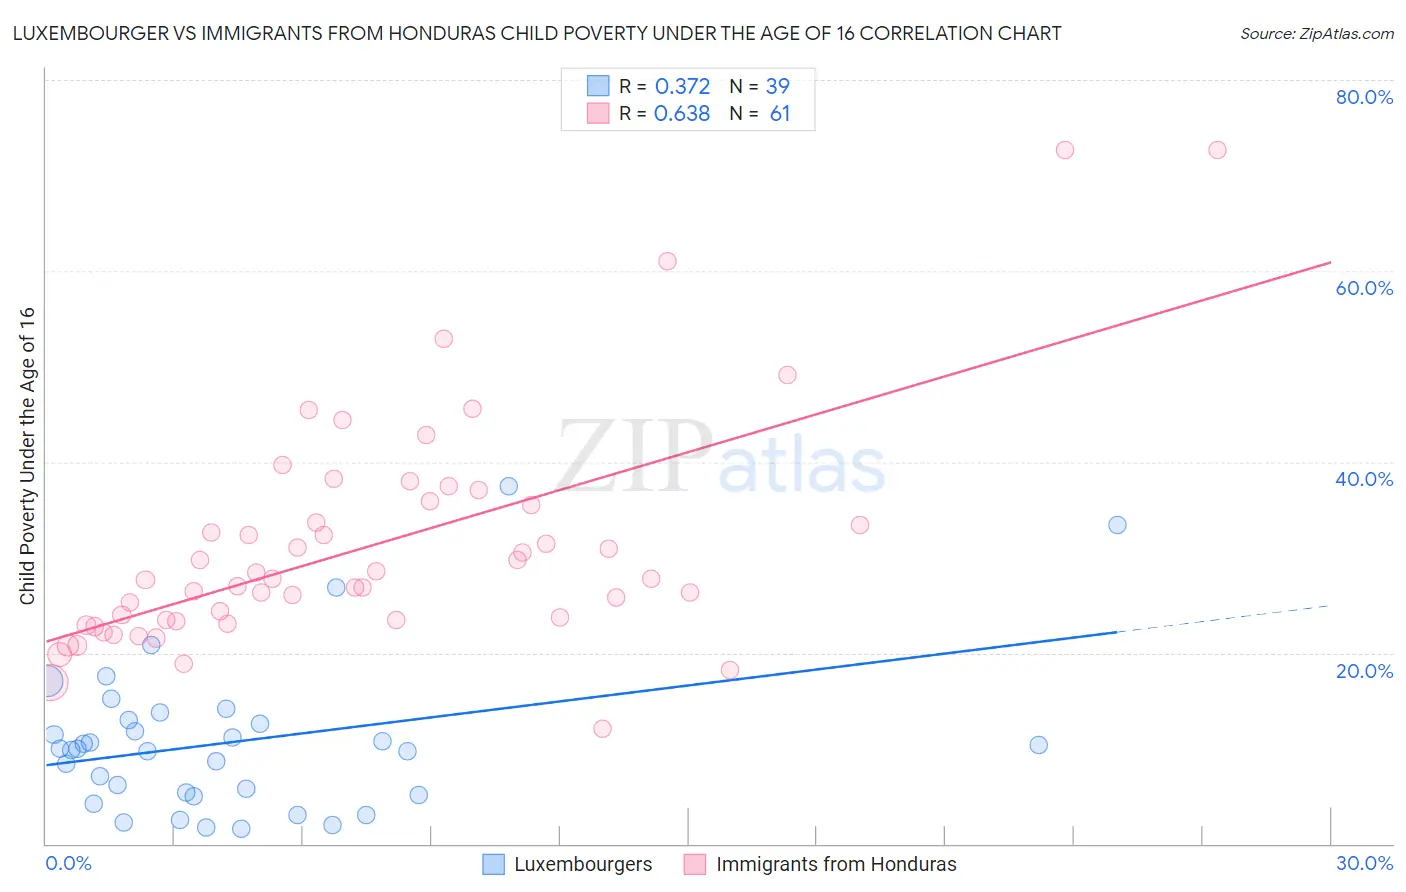 Luxembourger vs Immigrants from Honduras Child Poverty Under the Age of 16